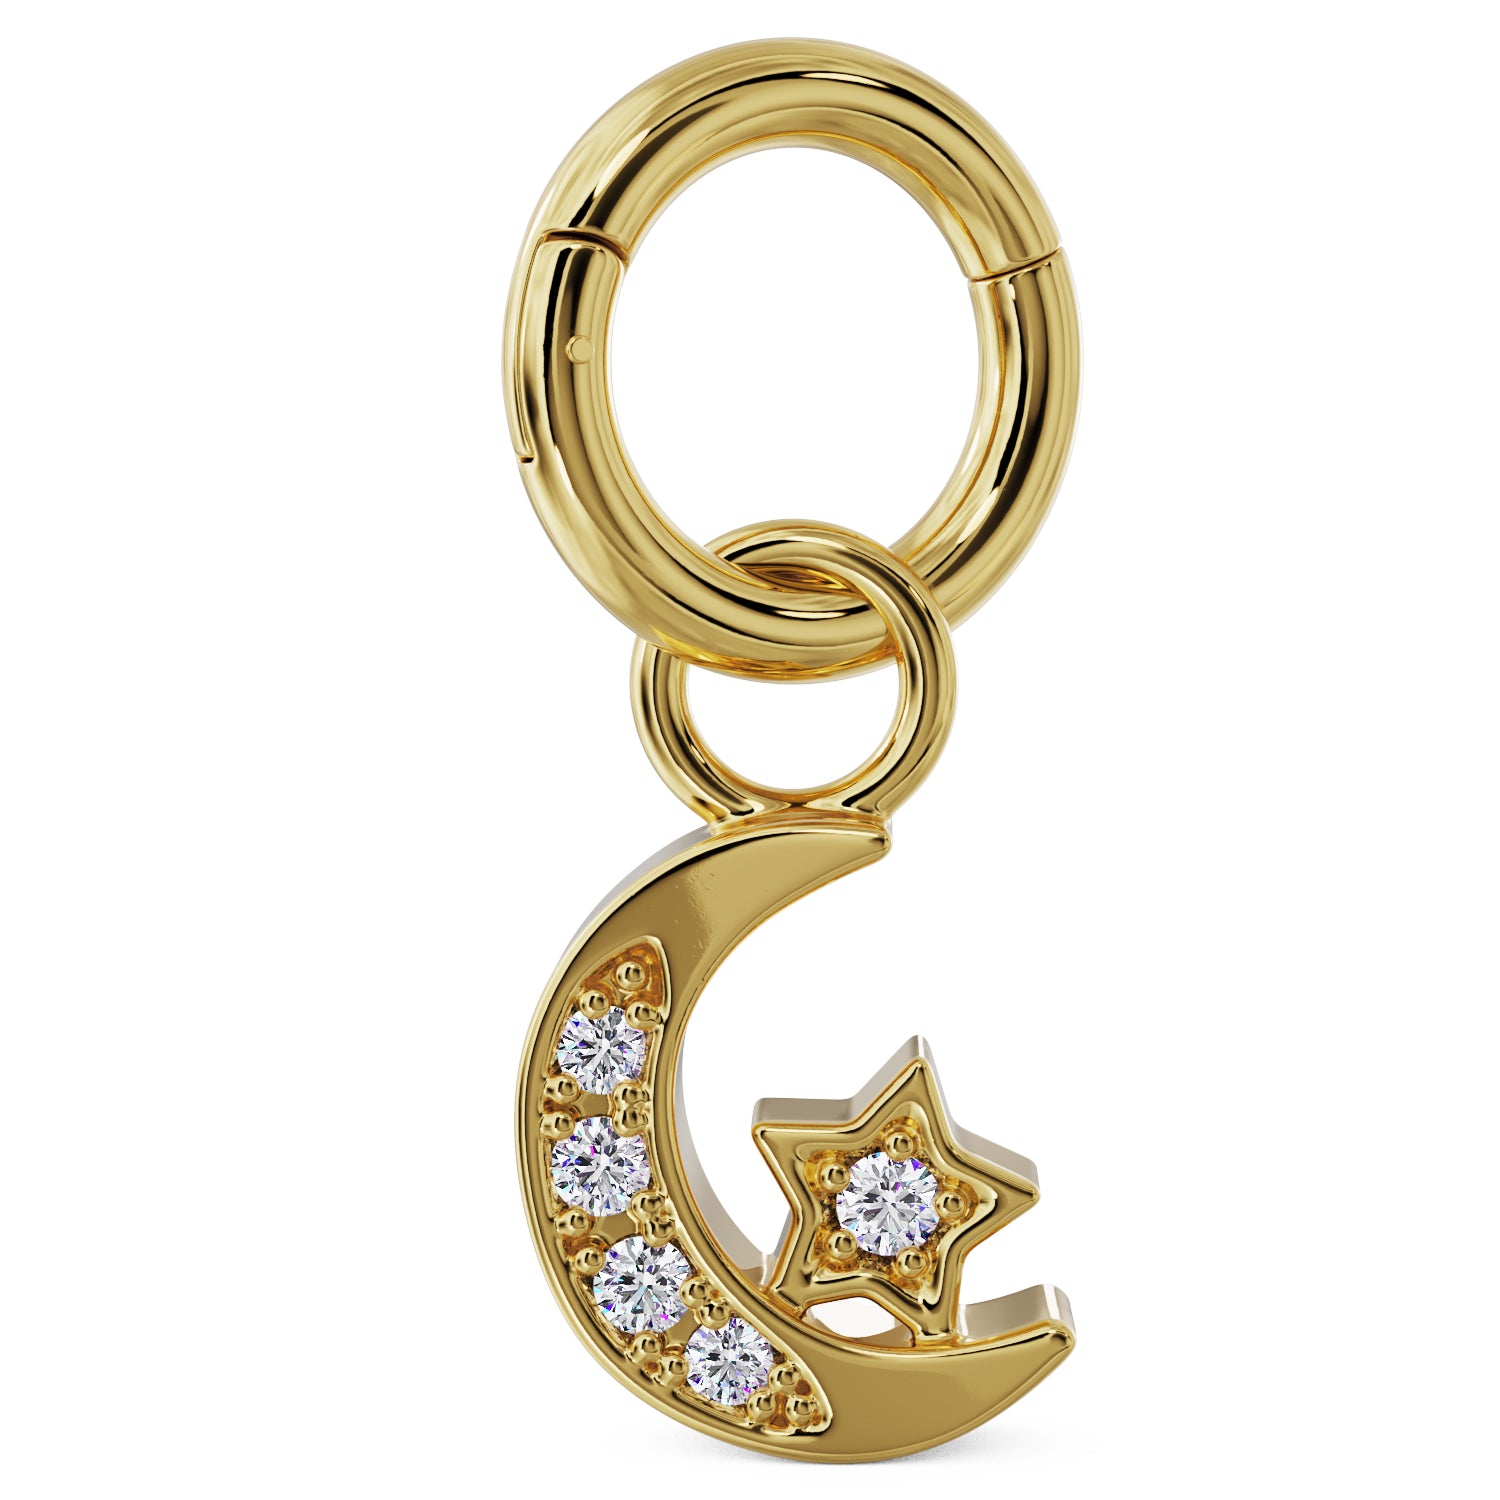 Clicker Ring Gold Moon and Star Diamond Charm Accessory for Piercing Jewelry